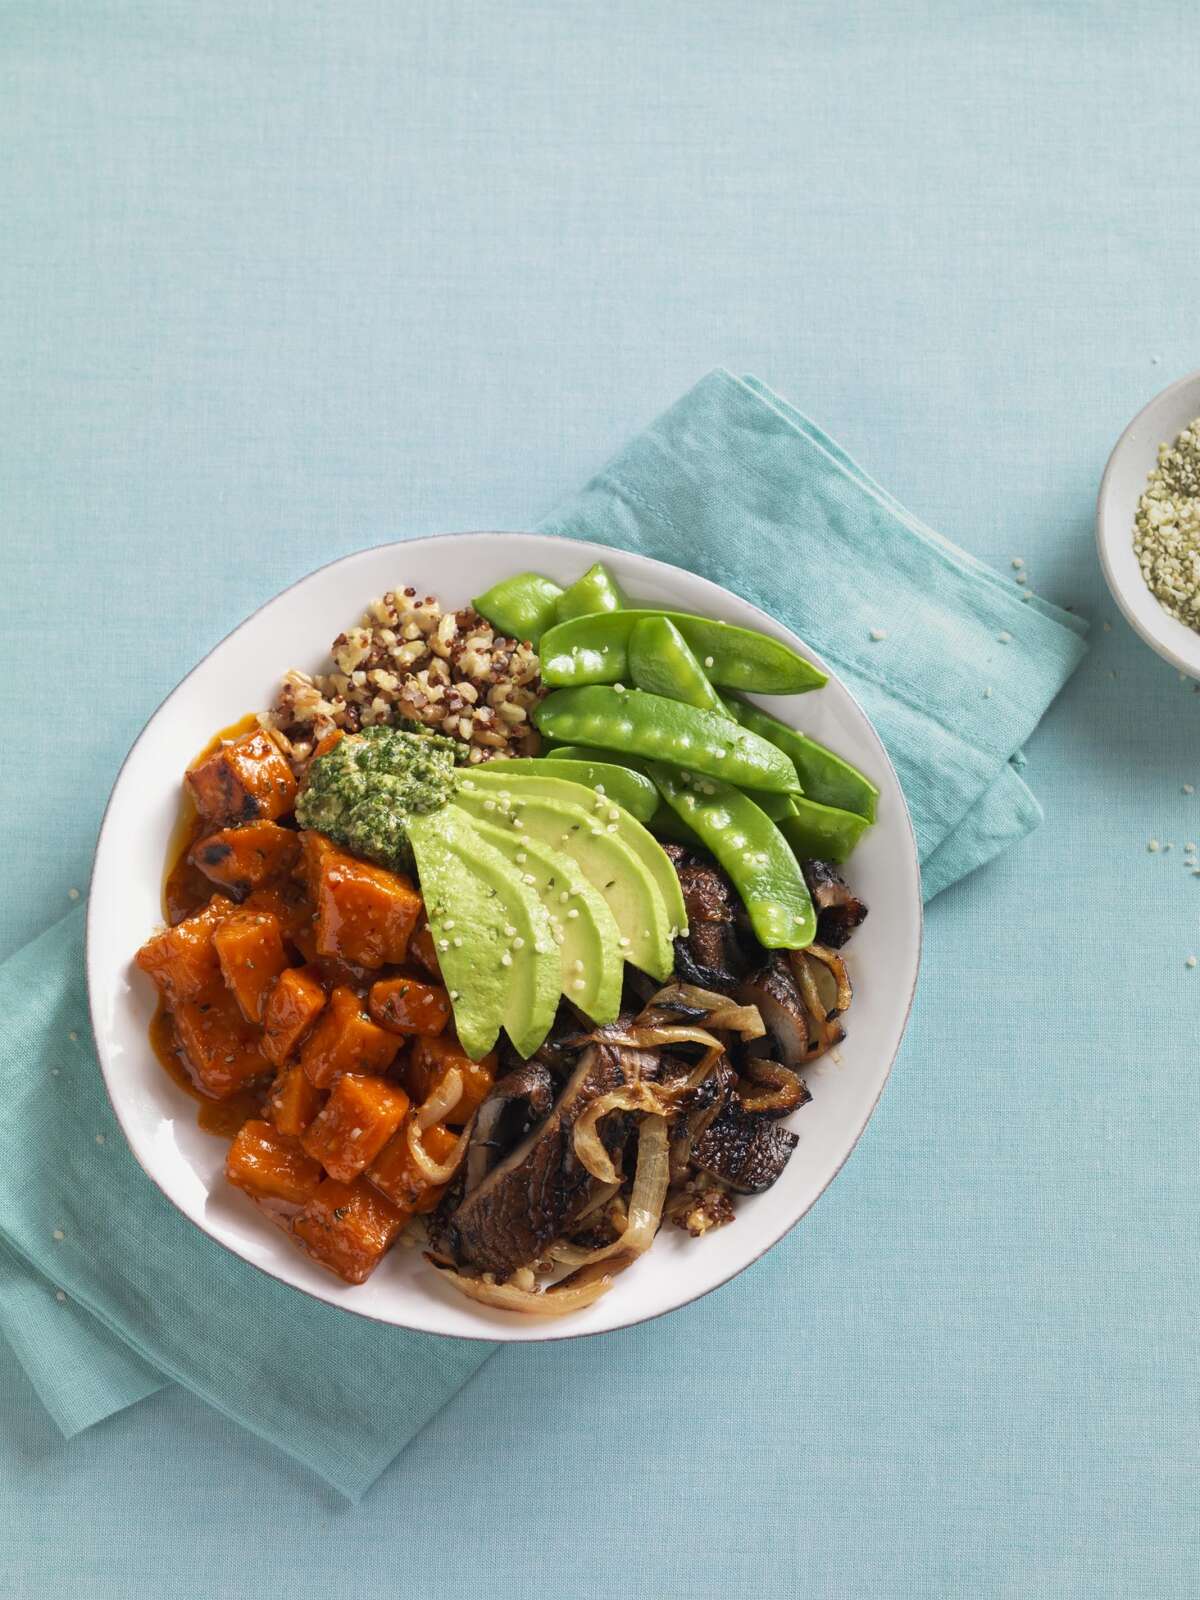 The Ancient Grains Bowl, pictured, is on the menu at True Foods Kitchen among other items such as Inside Out Quinoa Burger, Shiitake Lettuce Cups and Lasagna Bolognese.